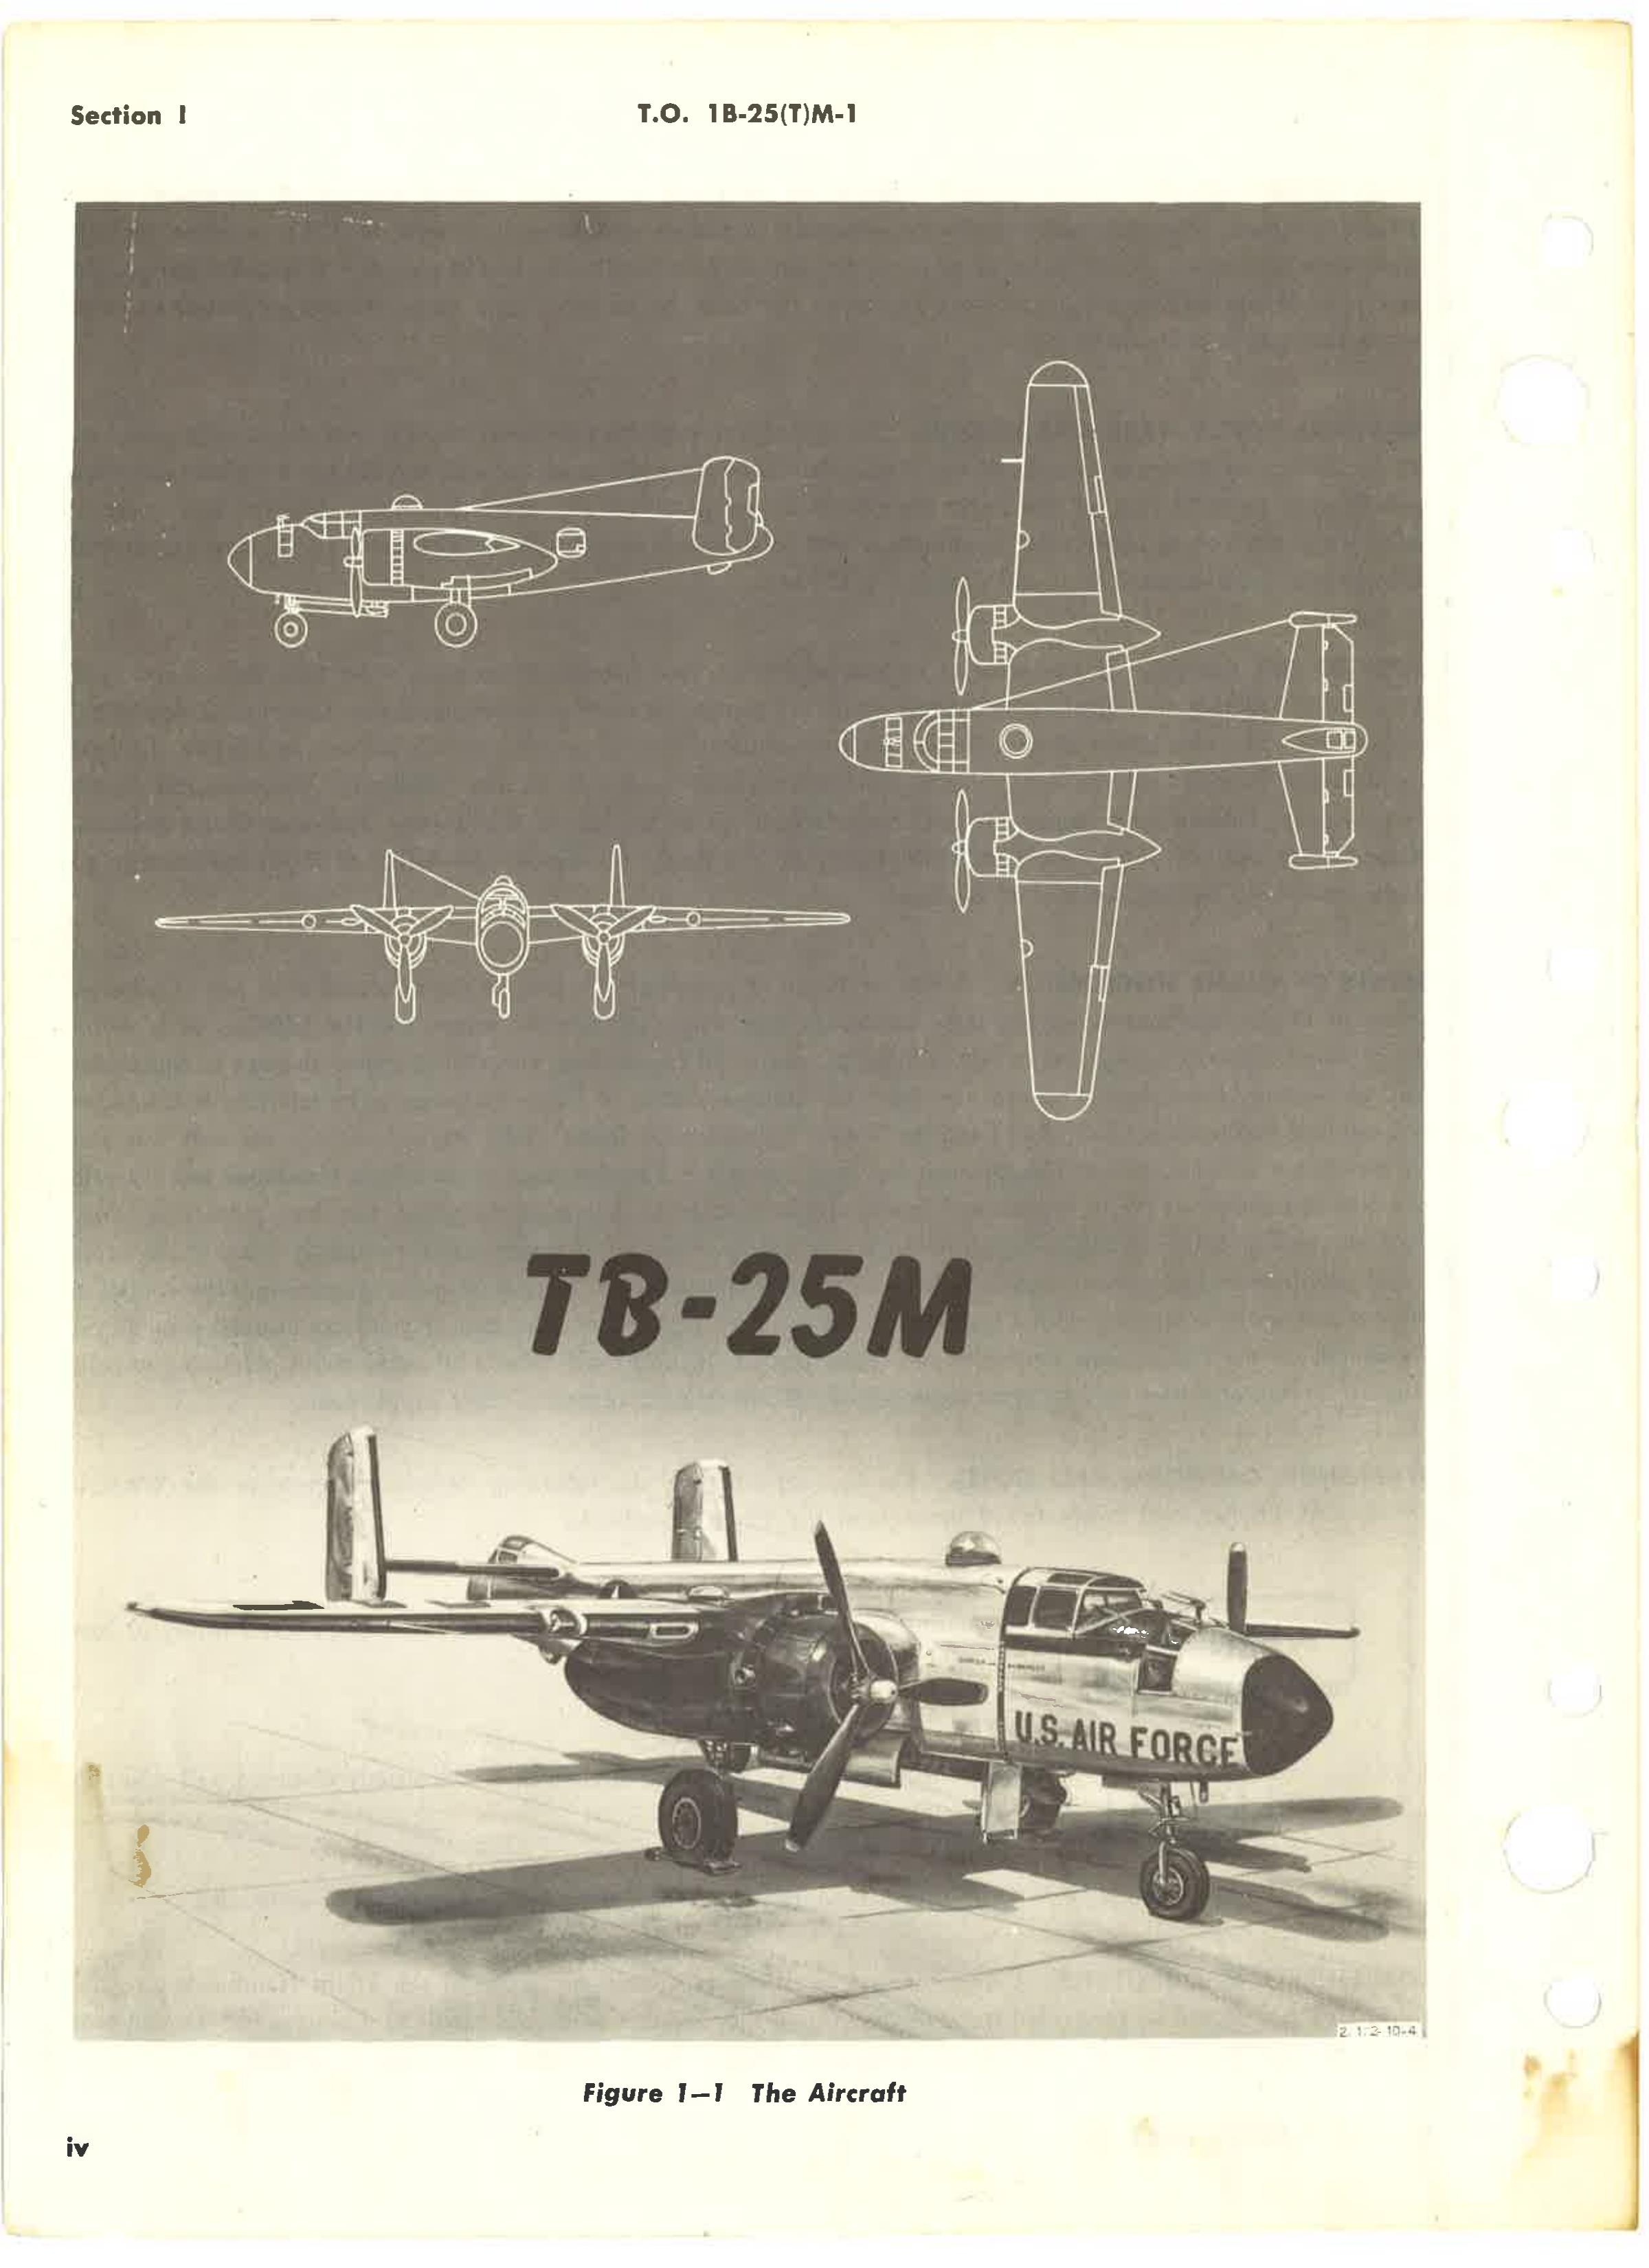 Sample page 6 from AirCorps Library document: Flight Handbook - TB-25M Aircraft